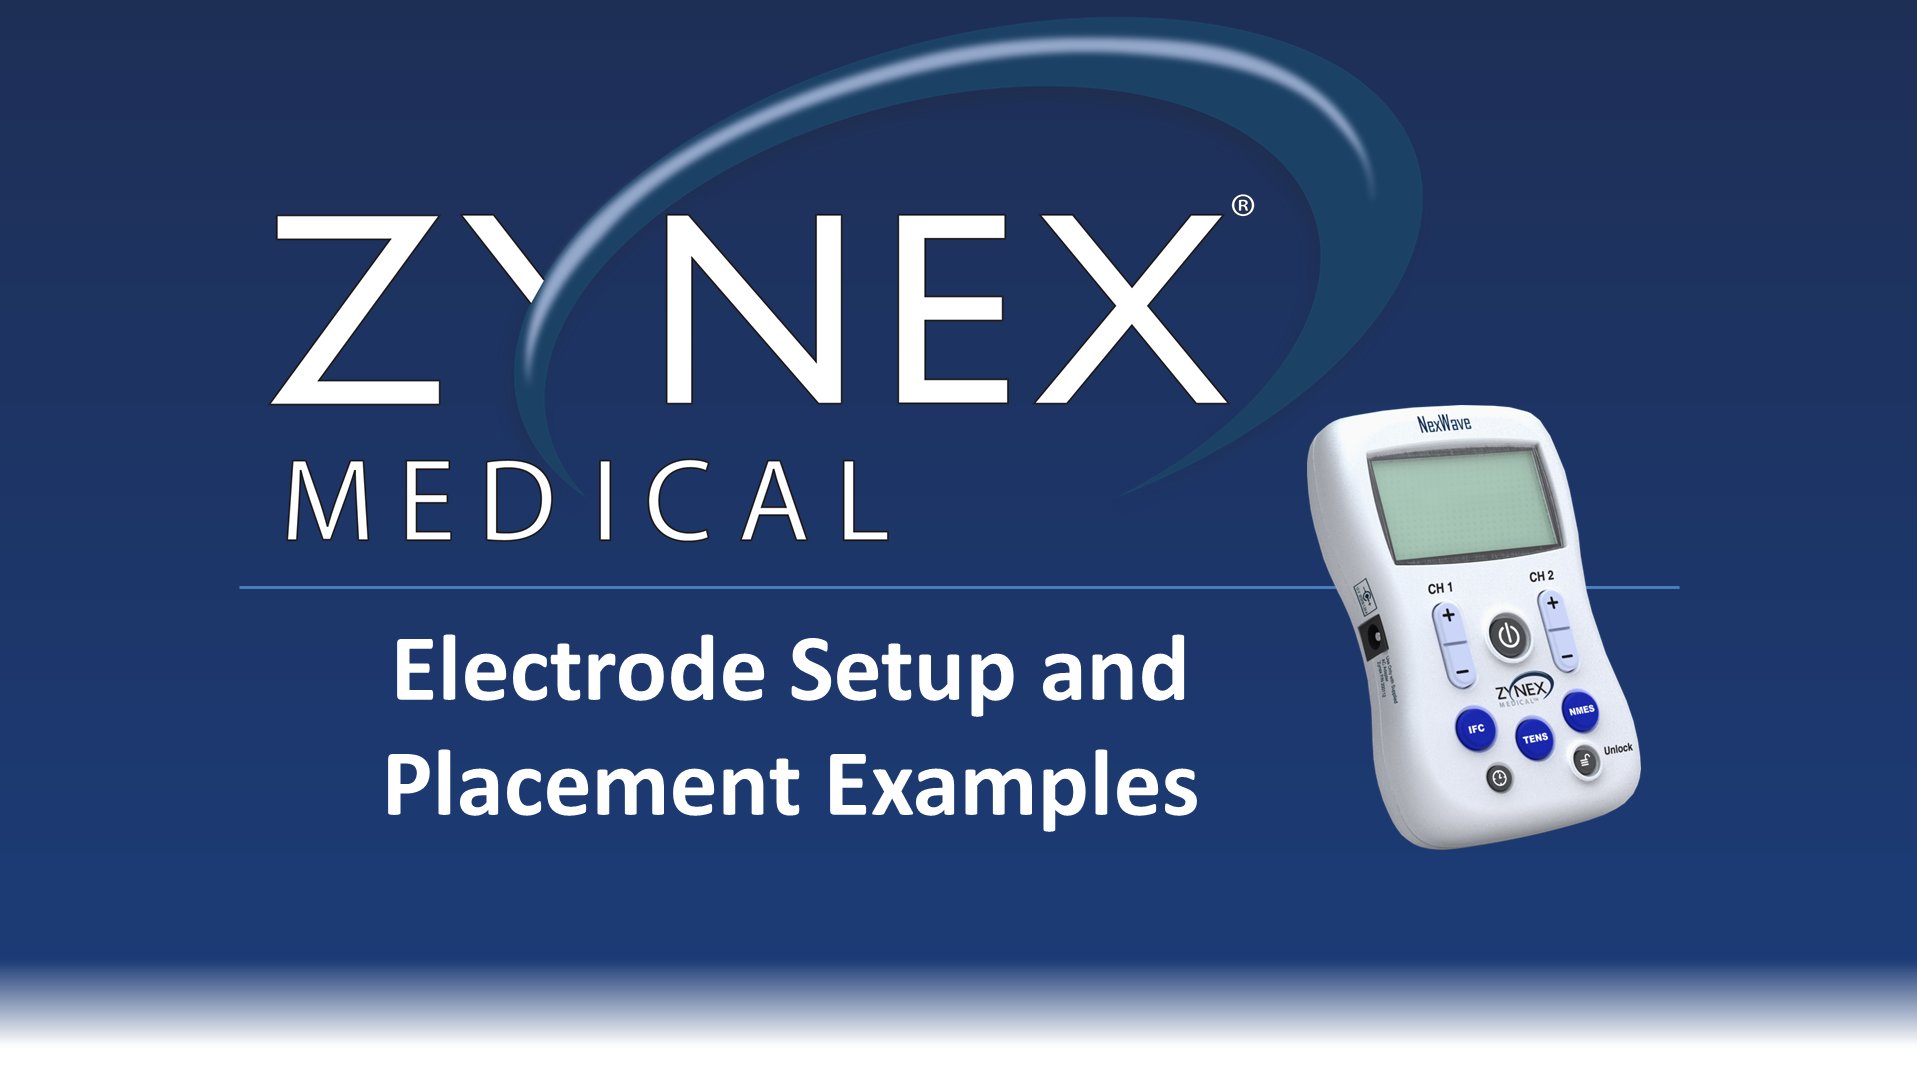 Zynex Medical on X: Our Electrode Placement Guide video has a ton of  easy-to-use, visual examples of how and where to place your electrodes when  treating with your Zynex NexWave device. Check